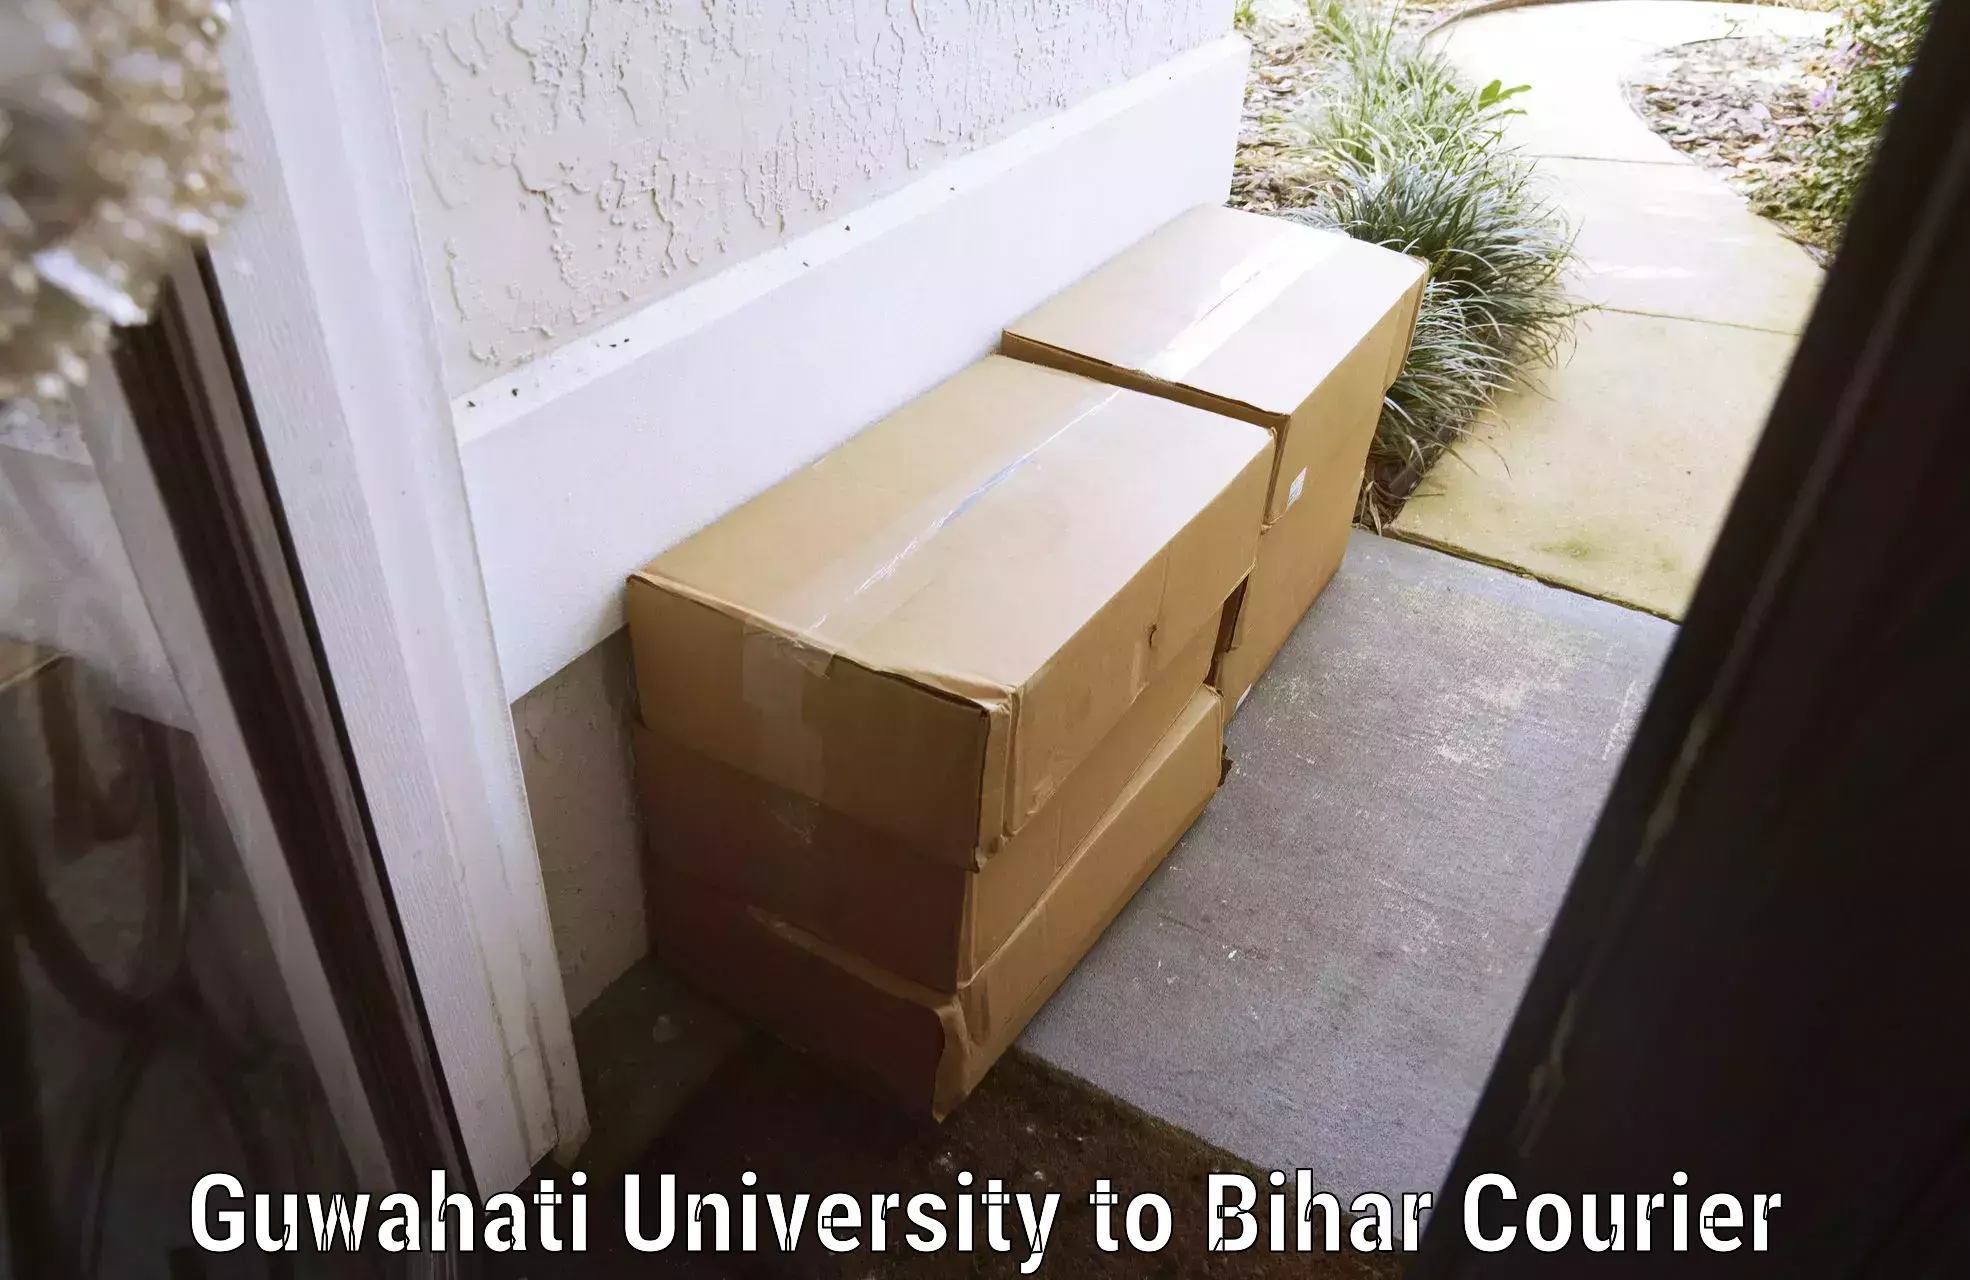 Luggage delivery system Guwahati University to Bihar